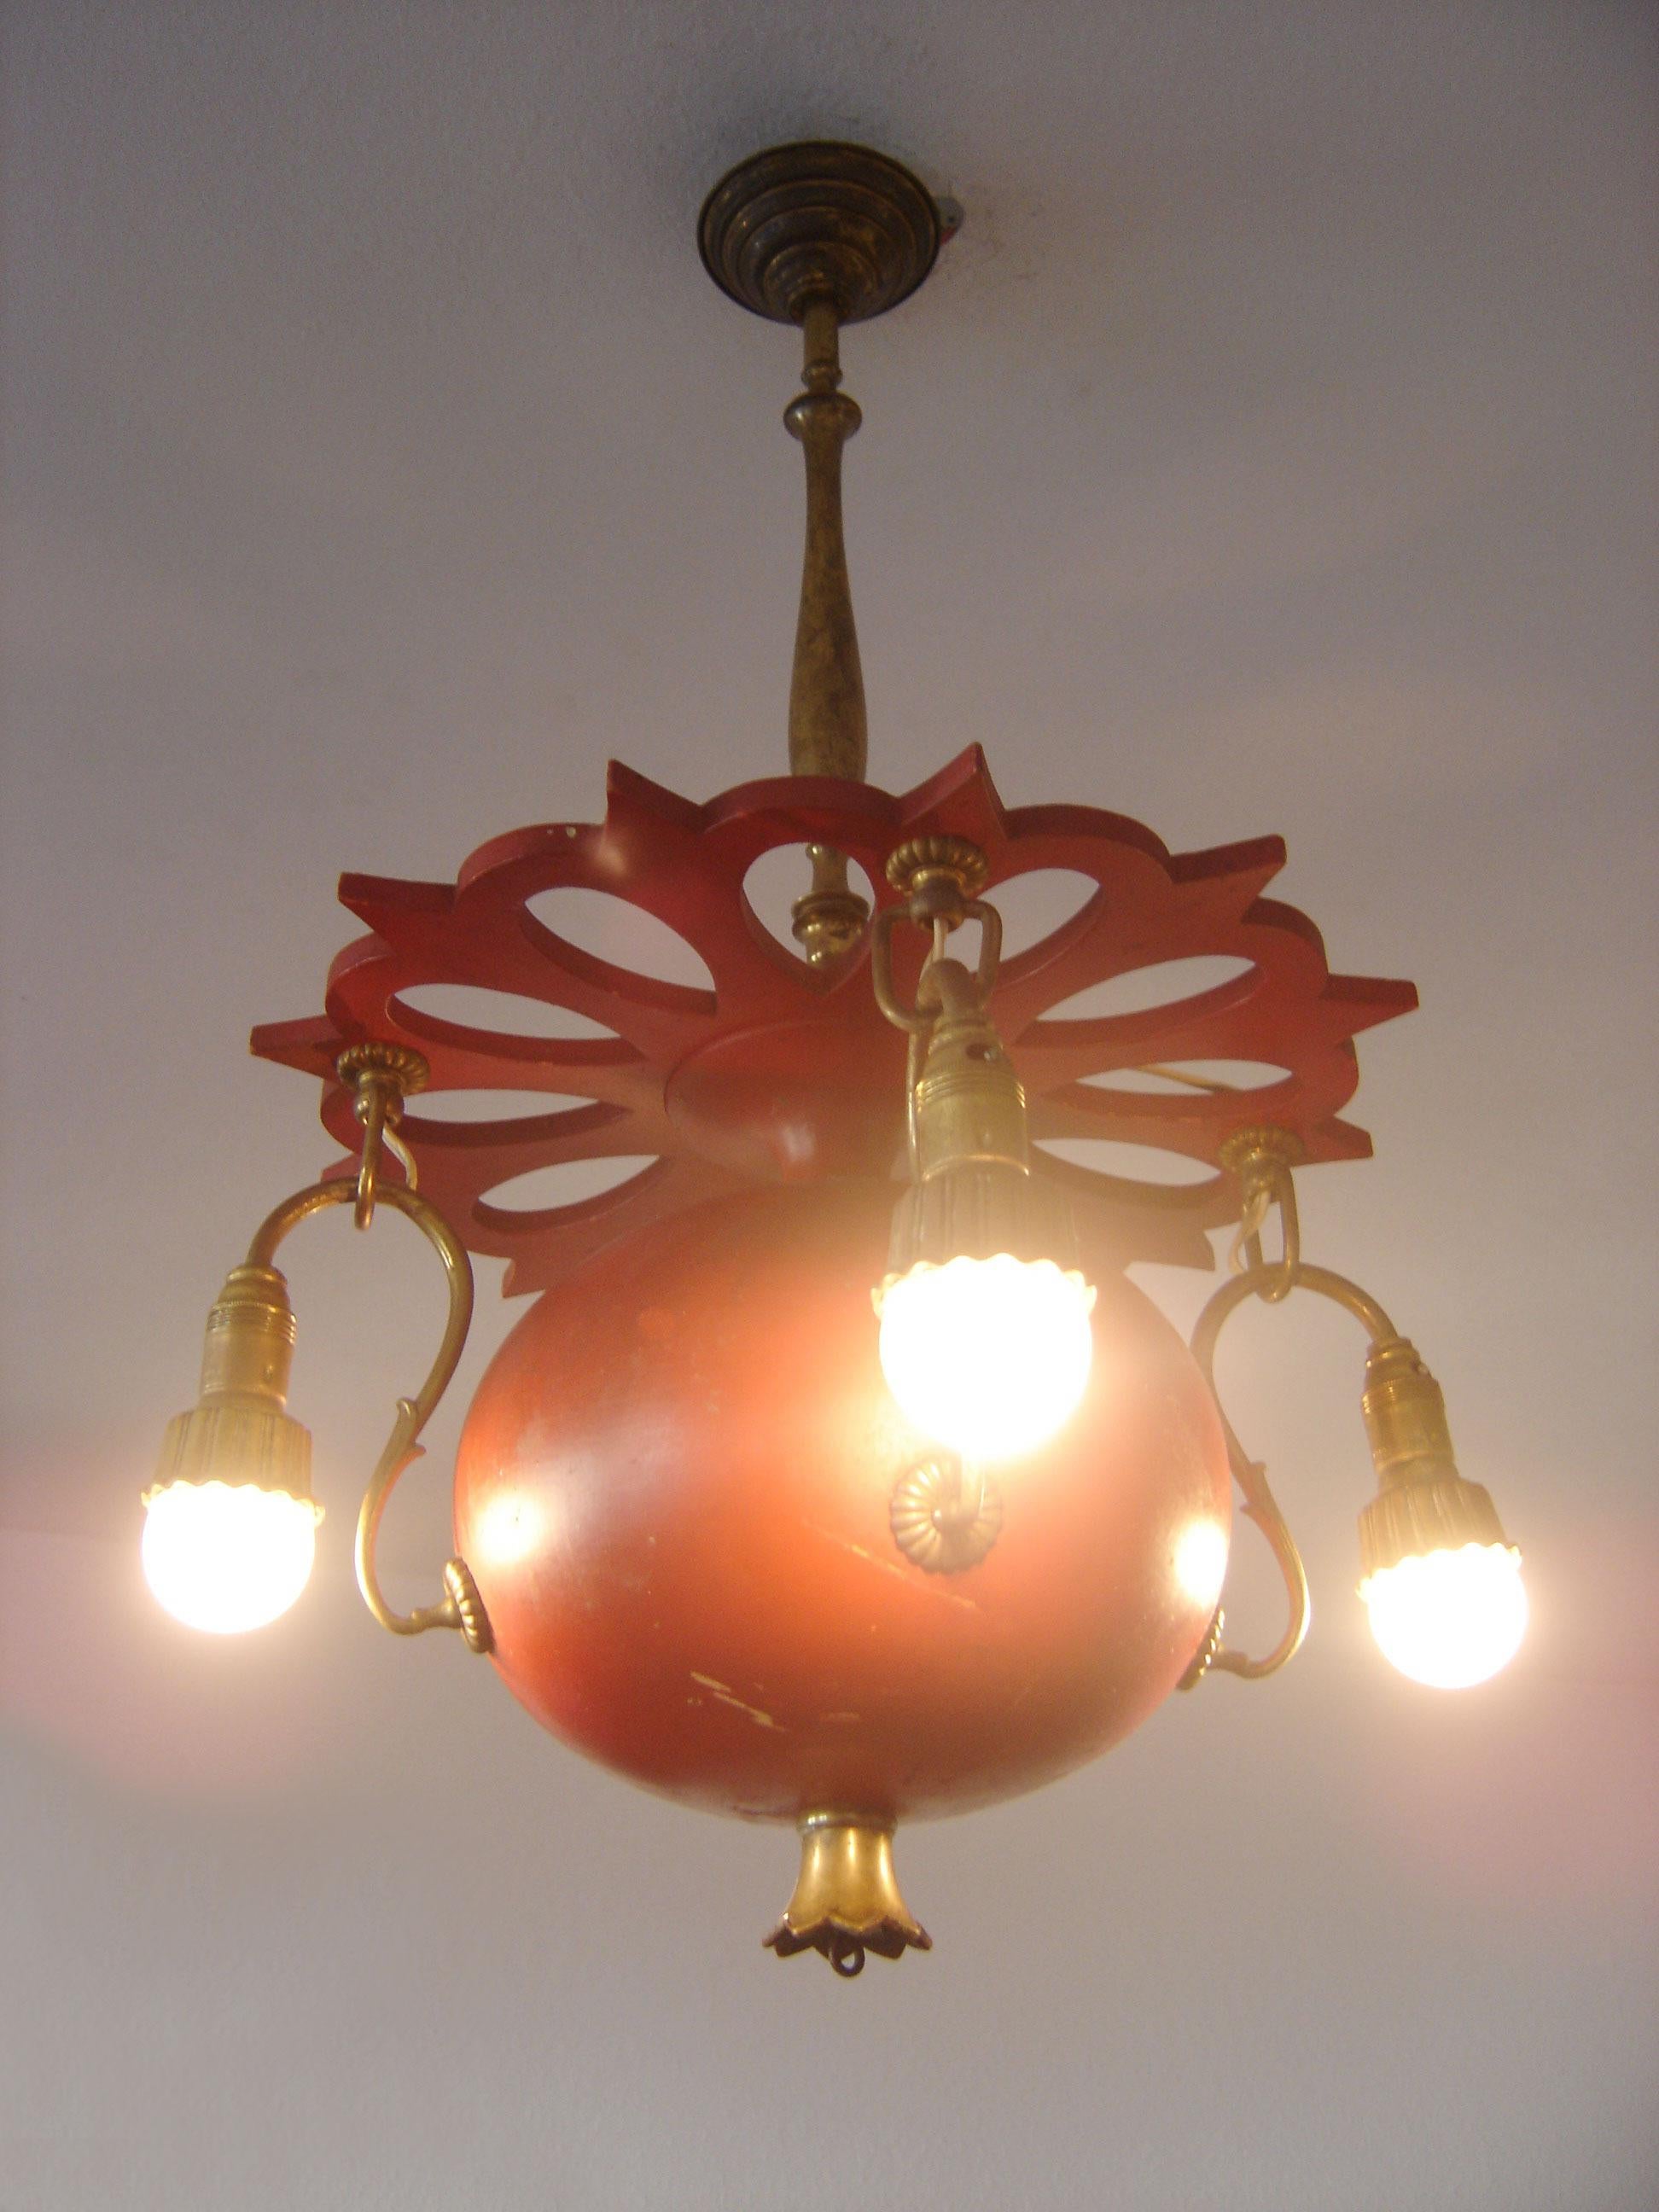 Extremely rare, original Art Nouveau chandelier or pendant lamp 'Granate Apple'. Manufactured about 1900s, Berlin, Germany.

Executed in wood and brass, the chandelier comes with 4 x E14 / E12 Edison screw fit bulb holders, is wired, and in working